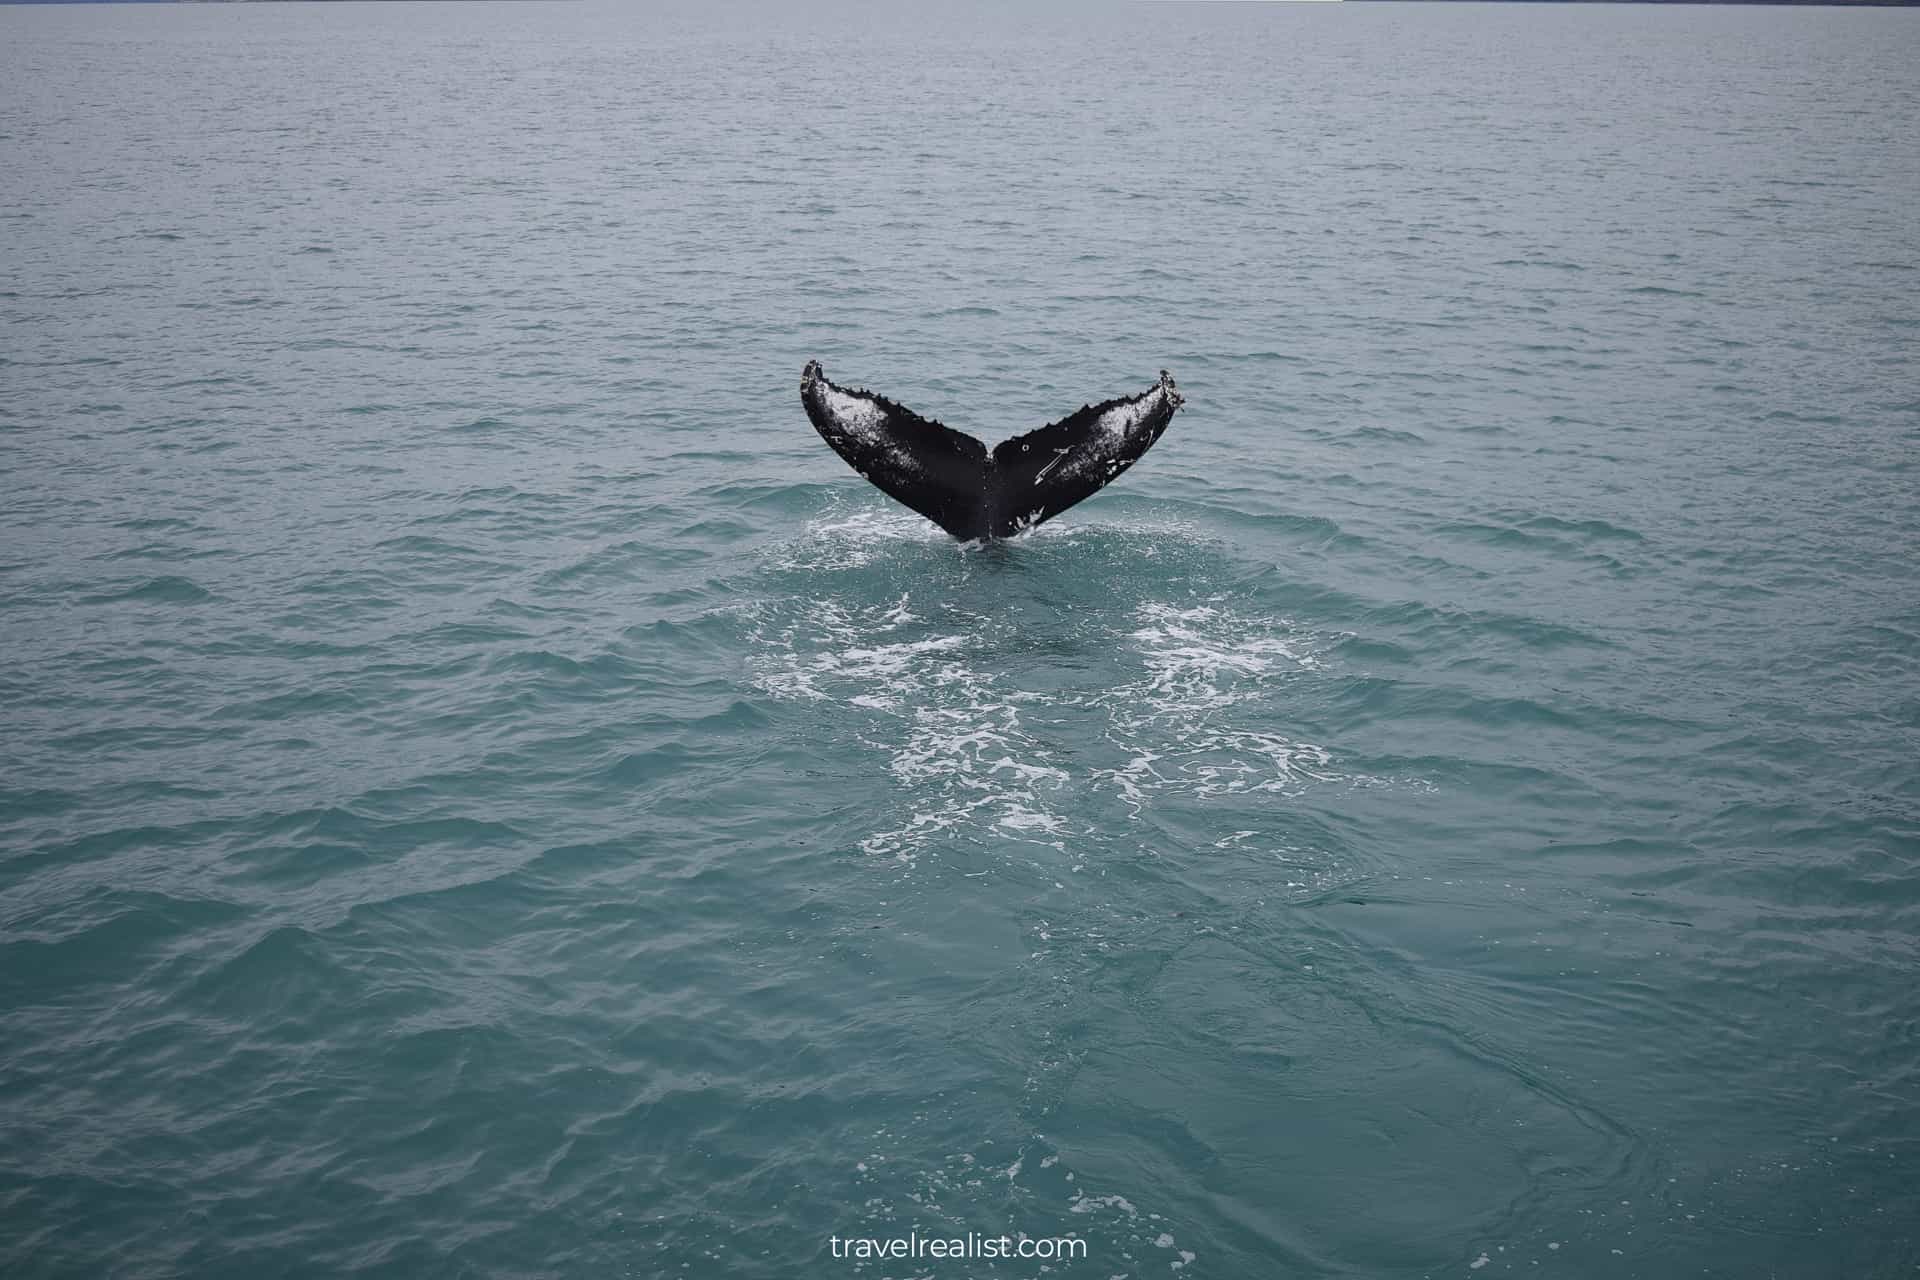 Whale fluke as seen on Whale Watching Iceland tour in Akureyri